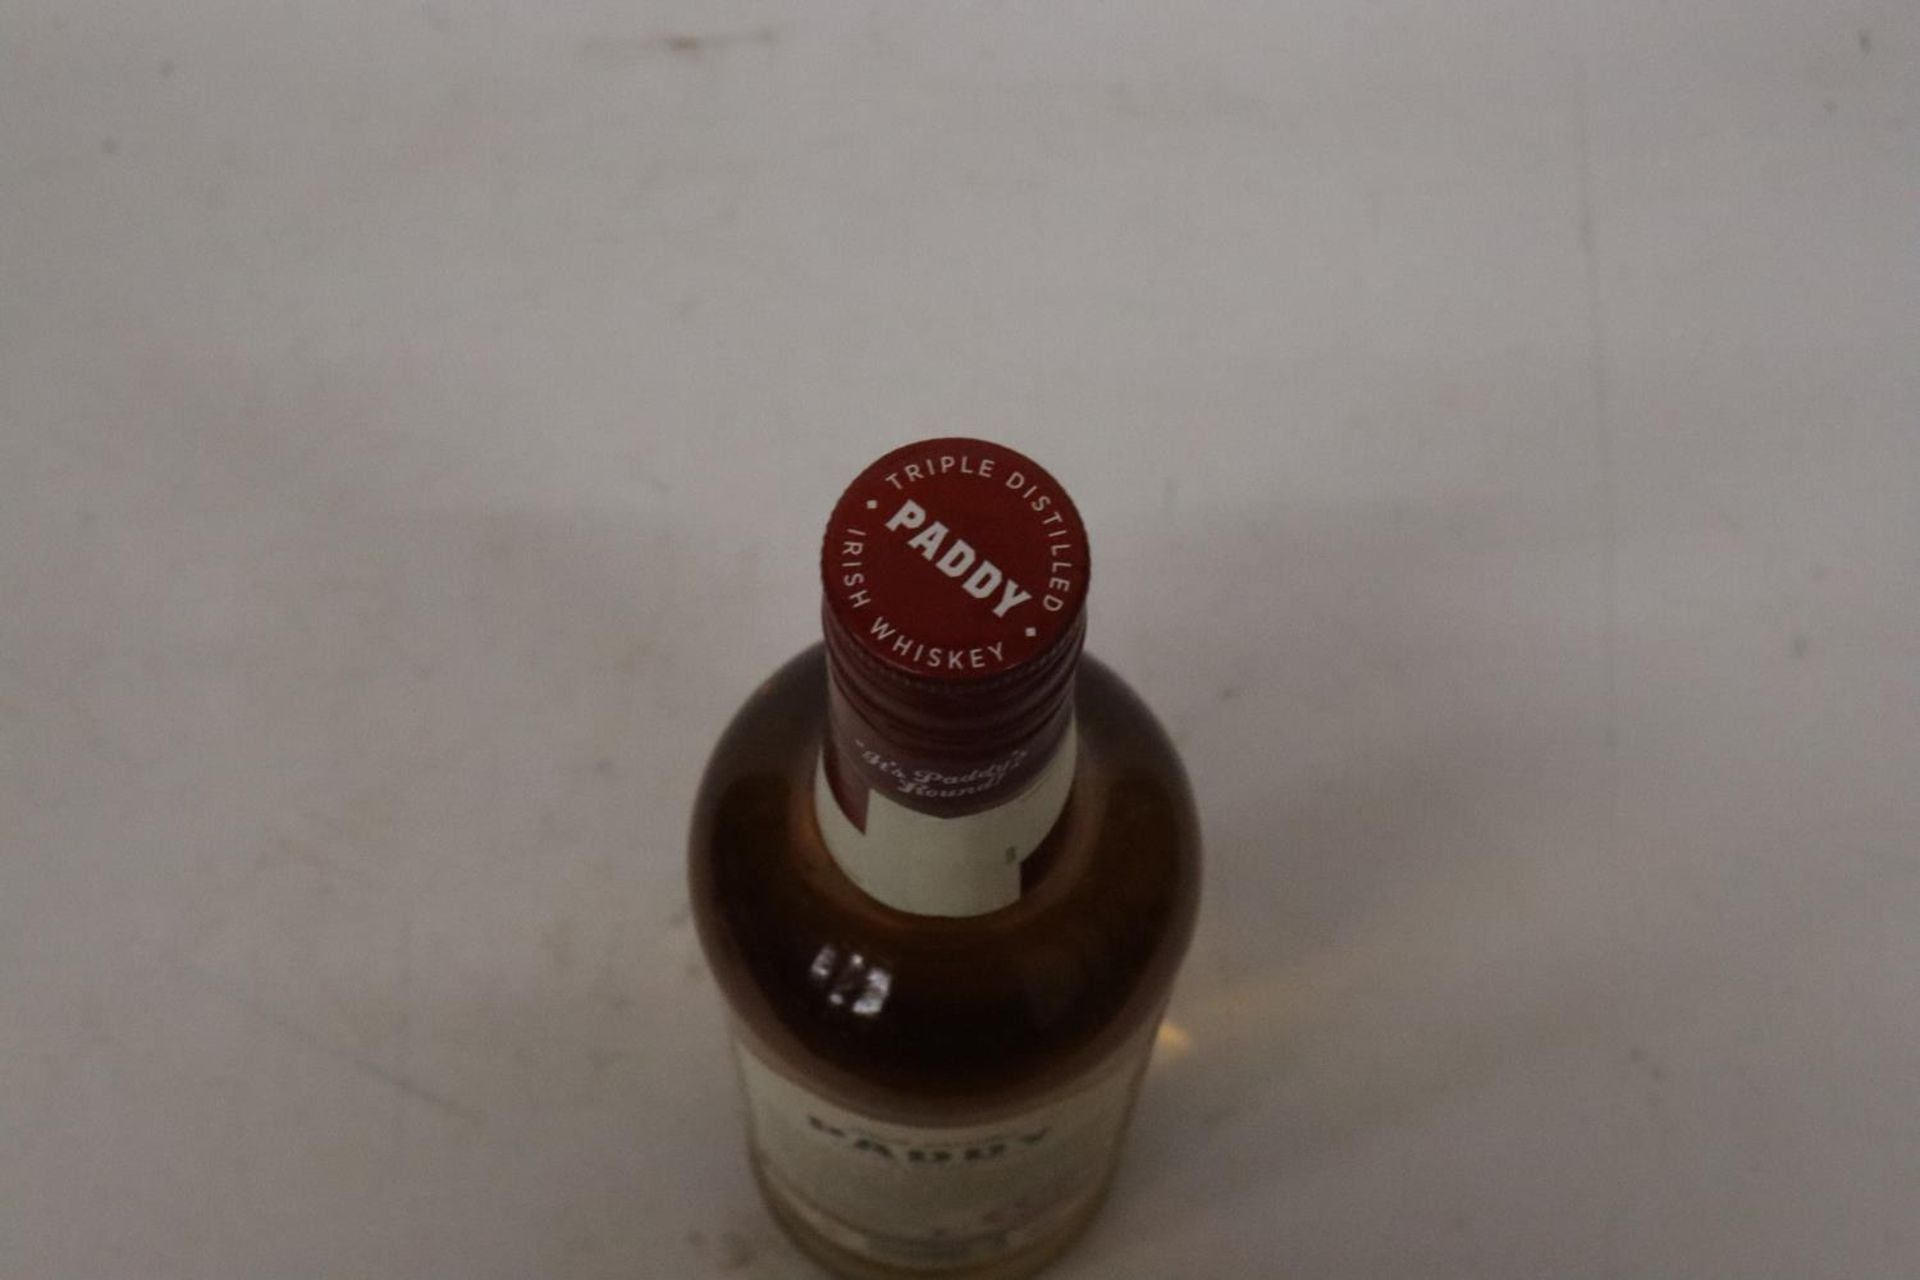 A 70CL BOTTLE OF PADDY IRISH WHISKY - Image 3 of 3